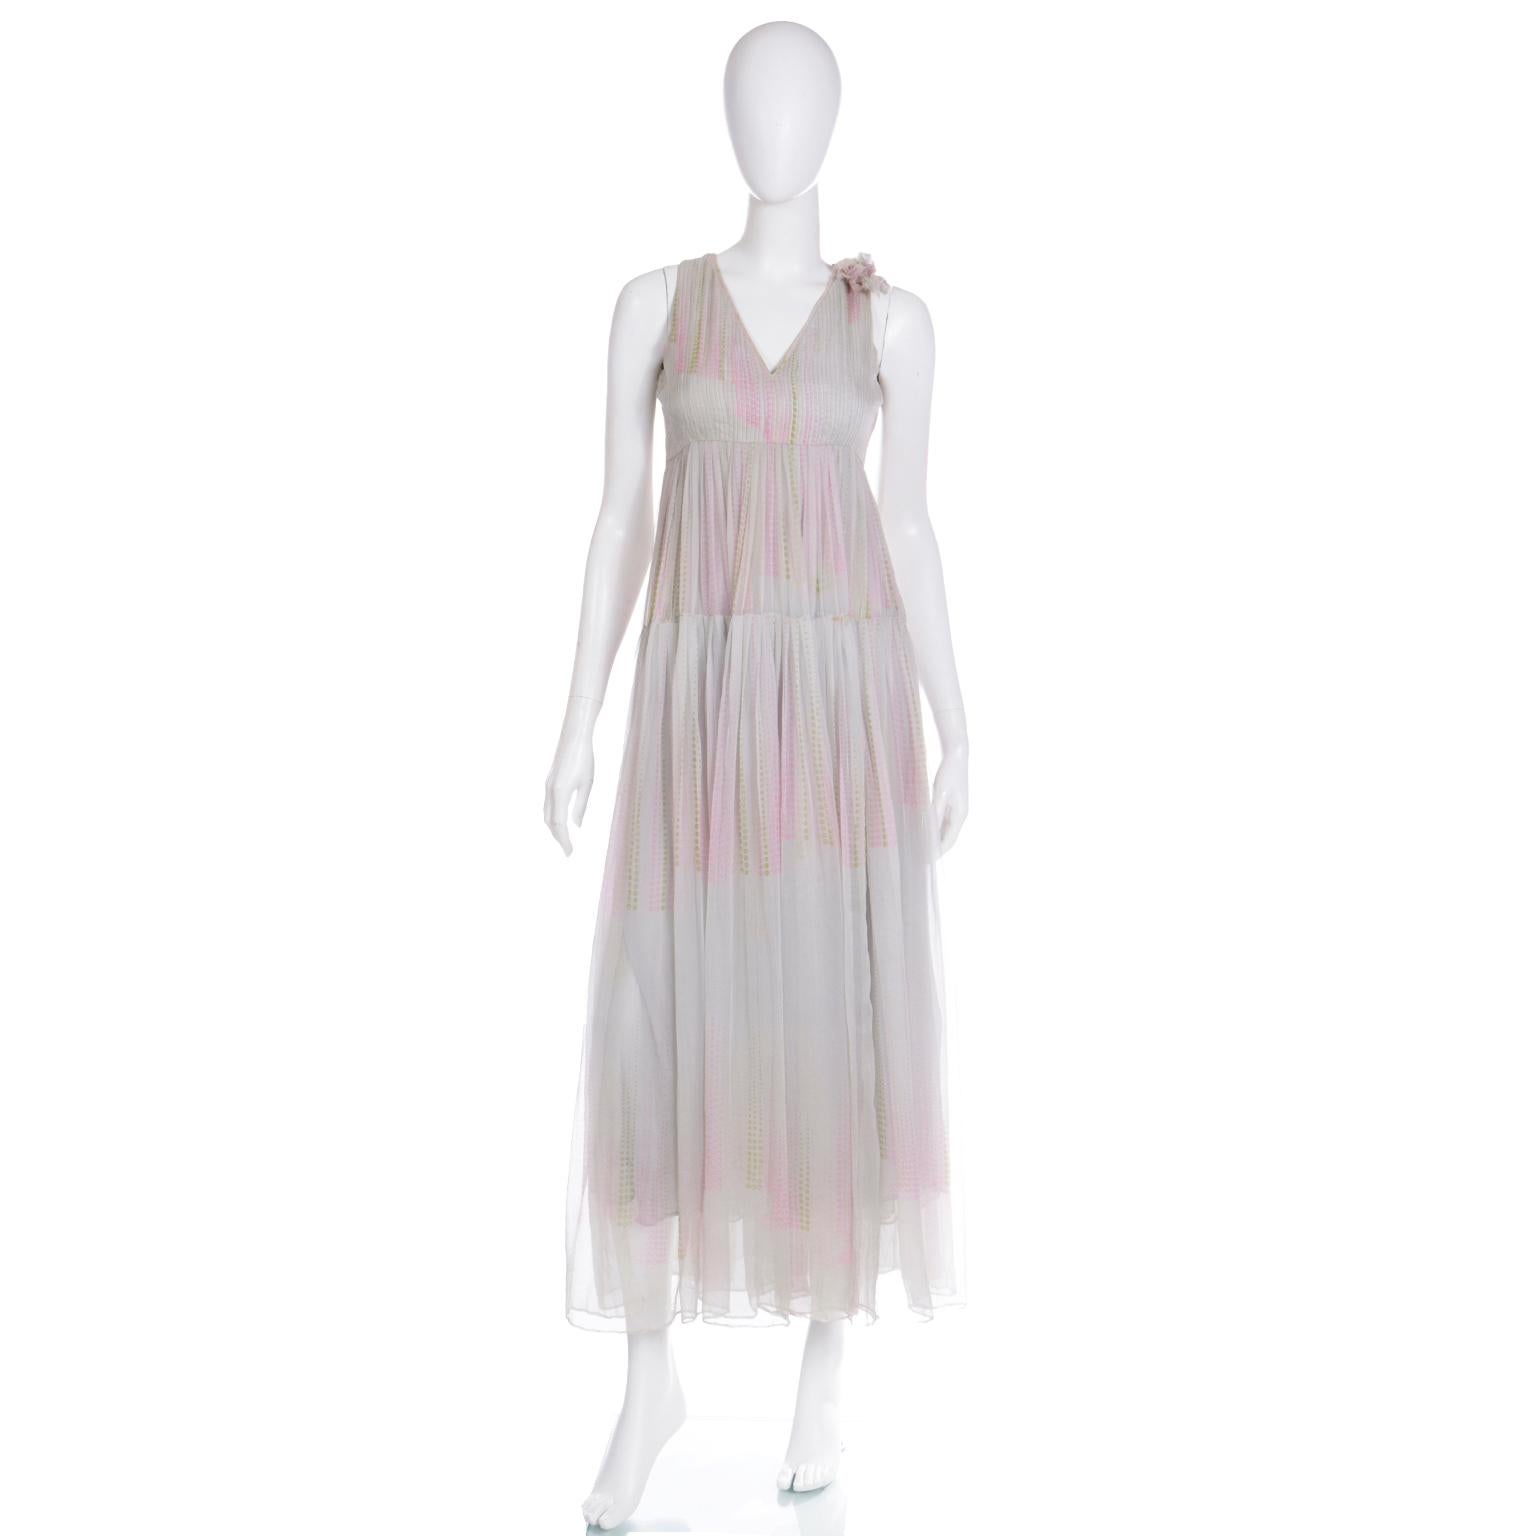 This incredible vintage early 1970's André Laug silk chiffon dress is in a pleated multi layered, tiered sheer pale grey silk chiffon with abstract pink and green dots. The bodice has an empire bust and there is a silk flower attached to one of the